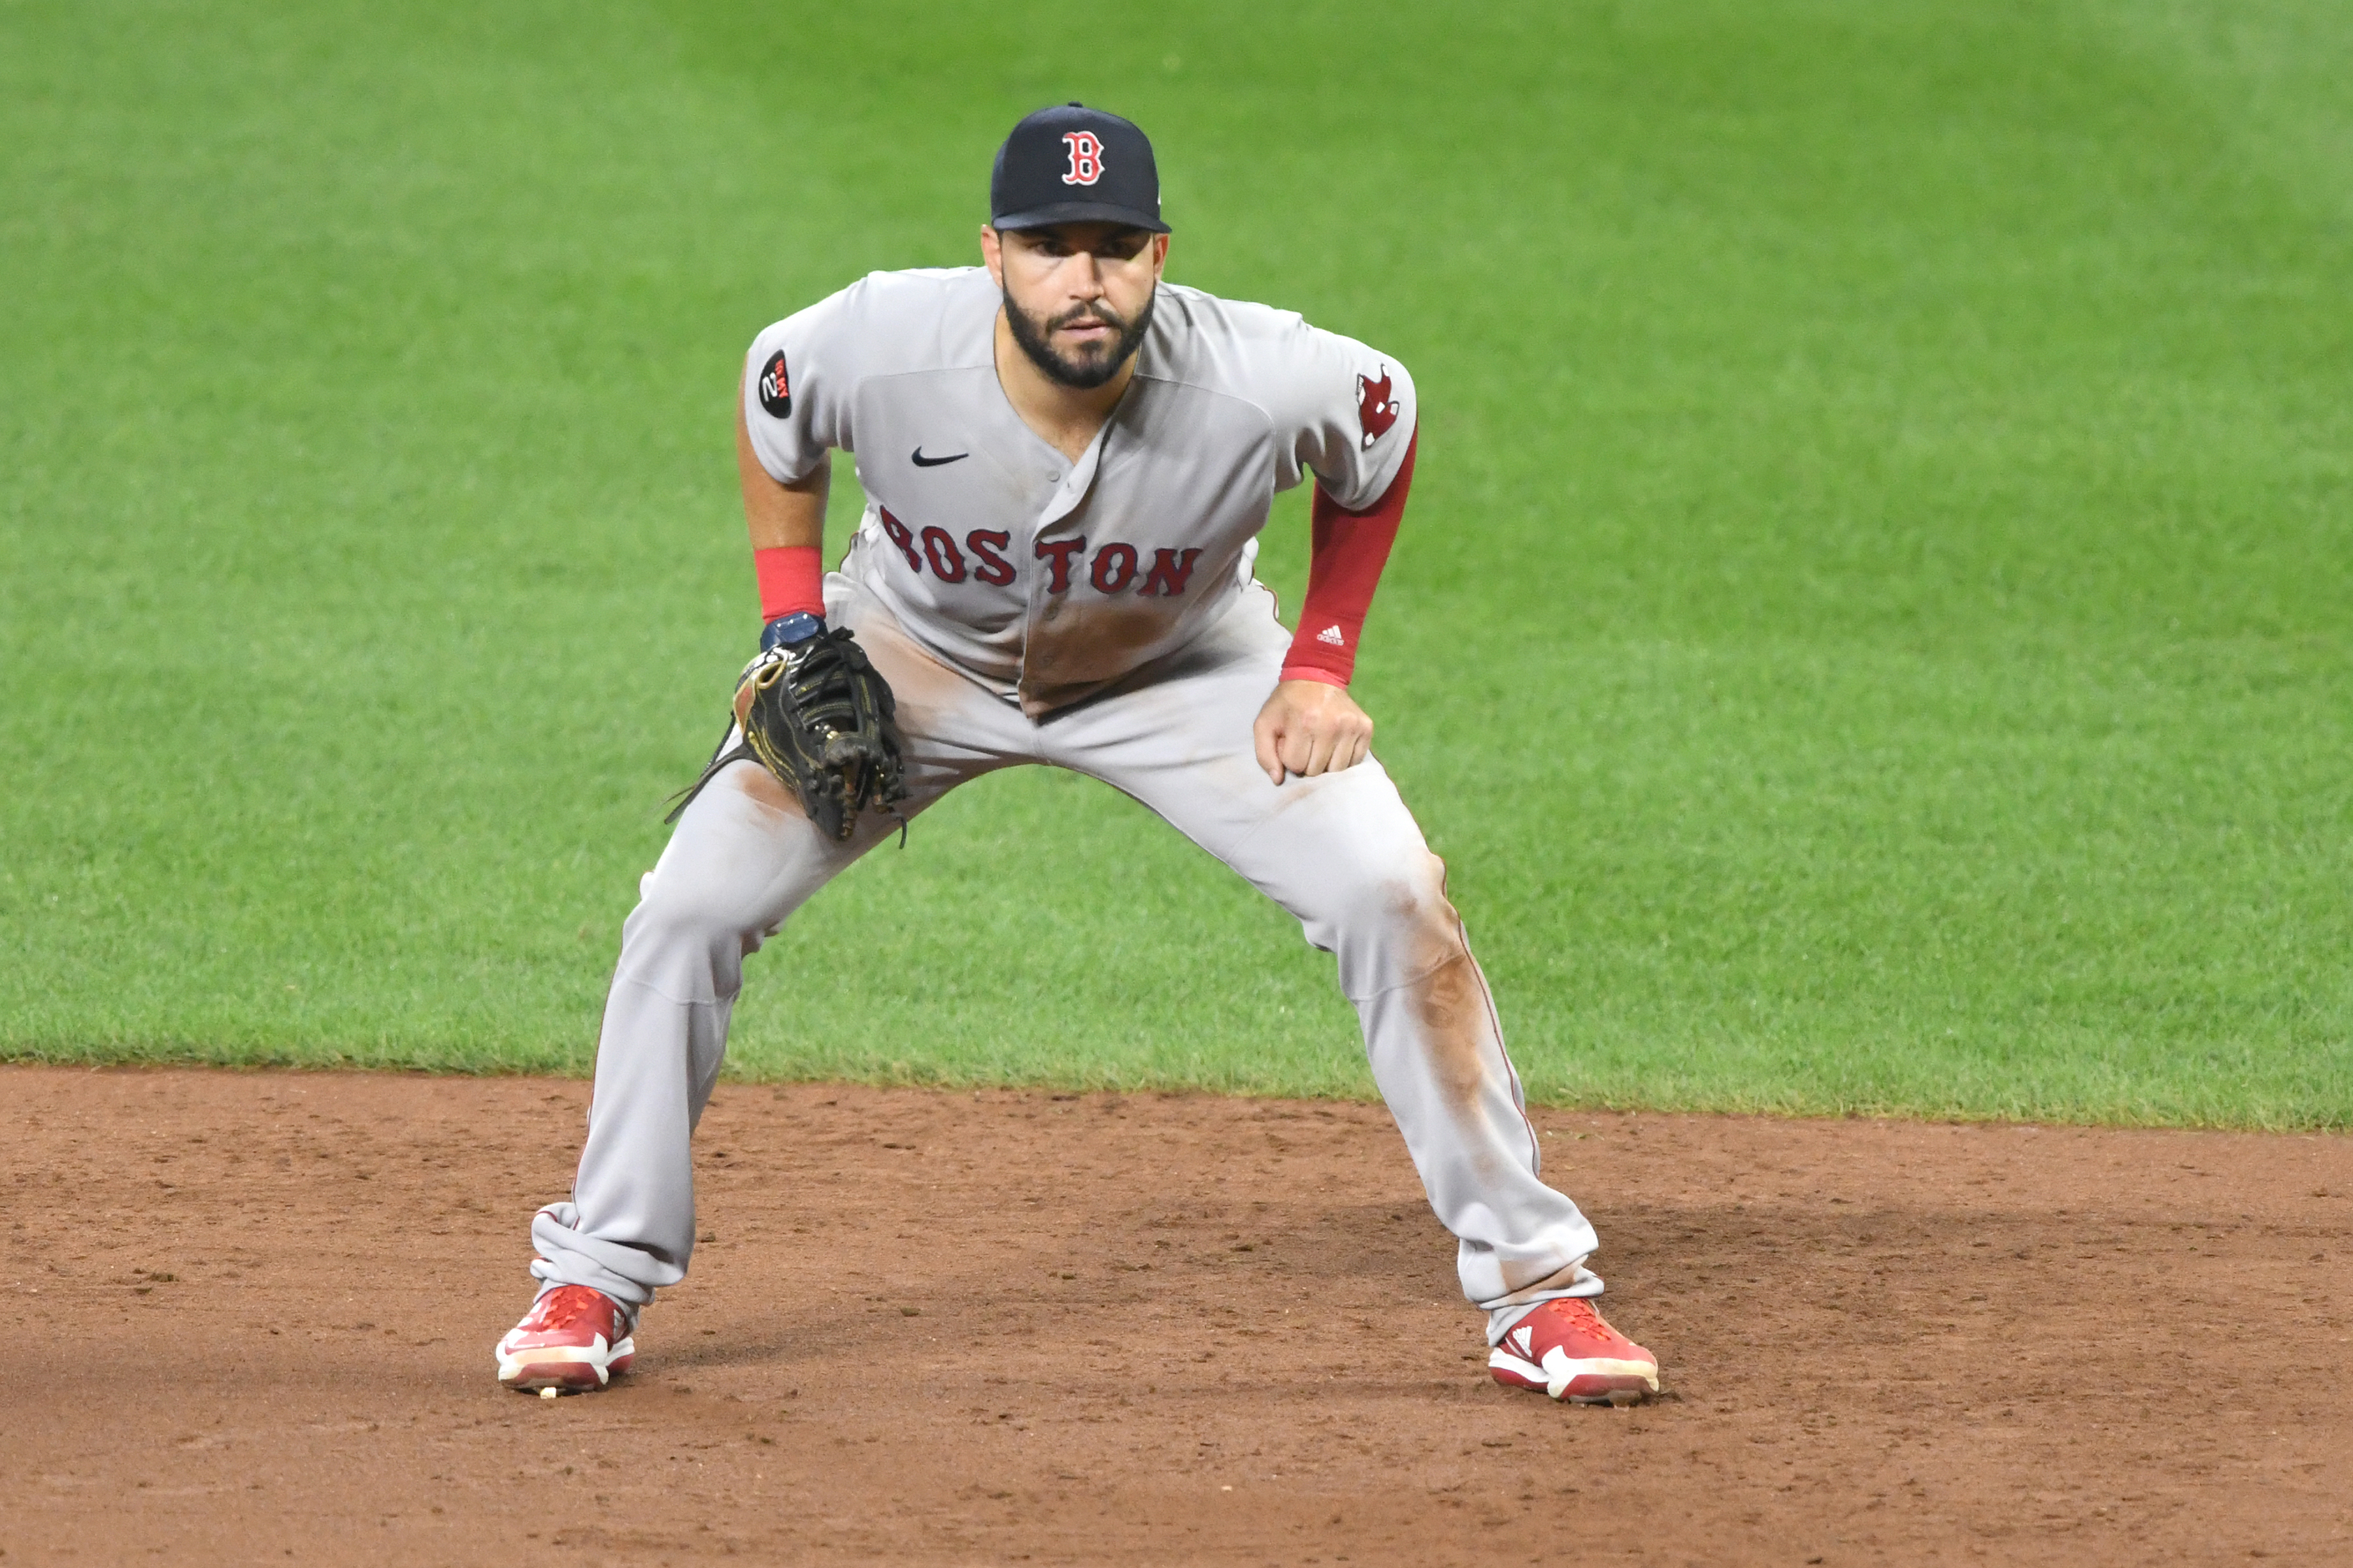 Eric Hosmer #35 of the Boston Red Sox tin position during a baseball game against the Baltimore Orioles at Oriole Park at Camden Yards on August 19, 2022 in Baltimore, Maryland.